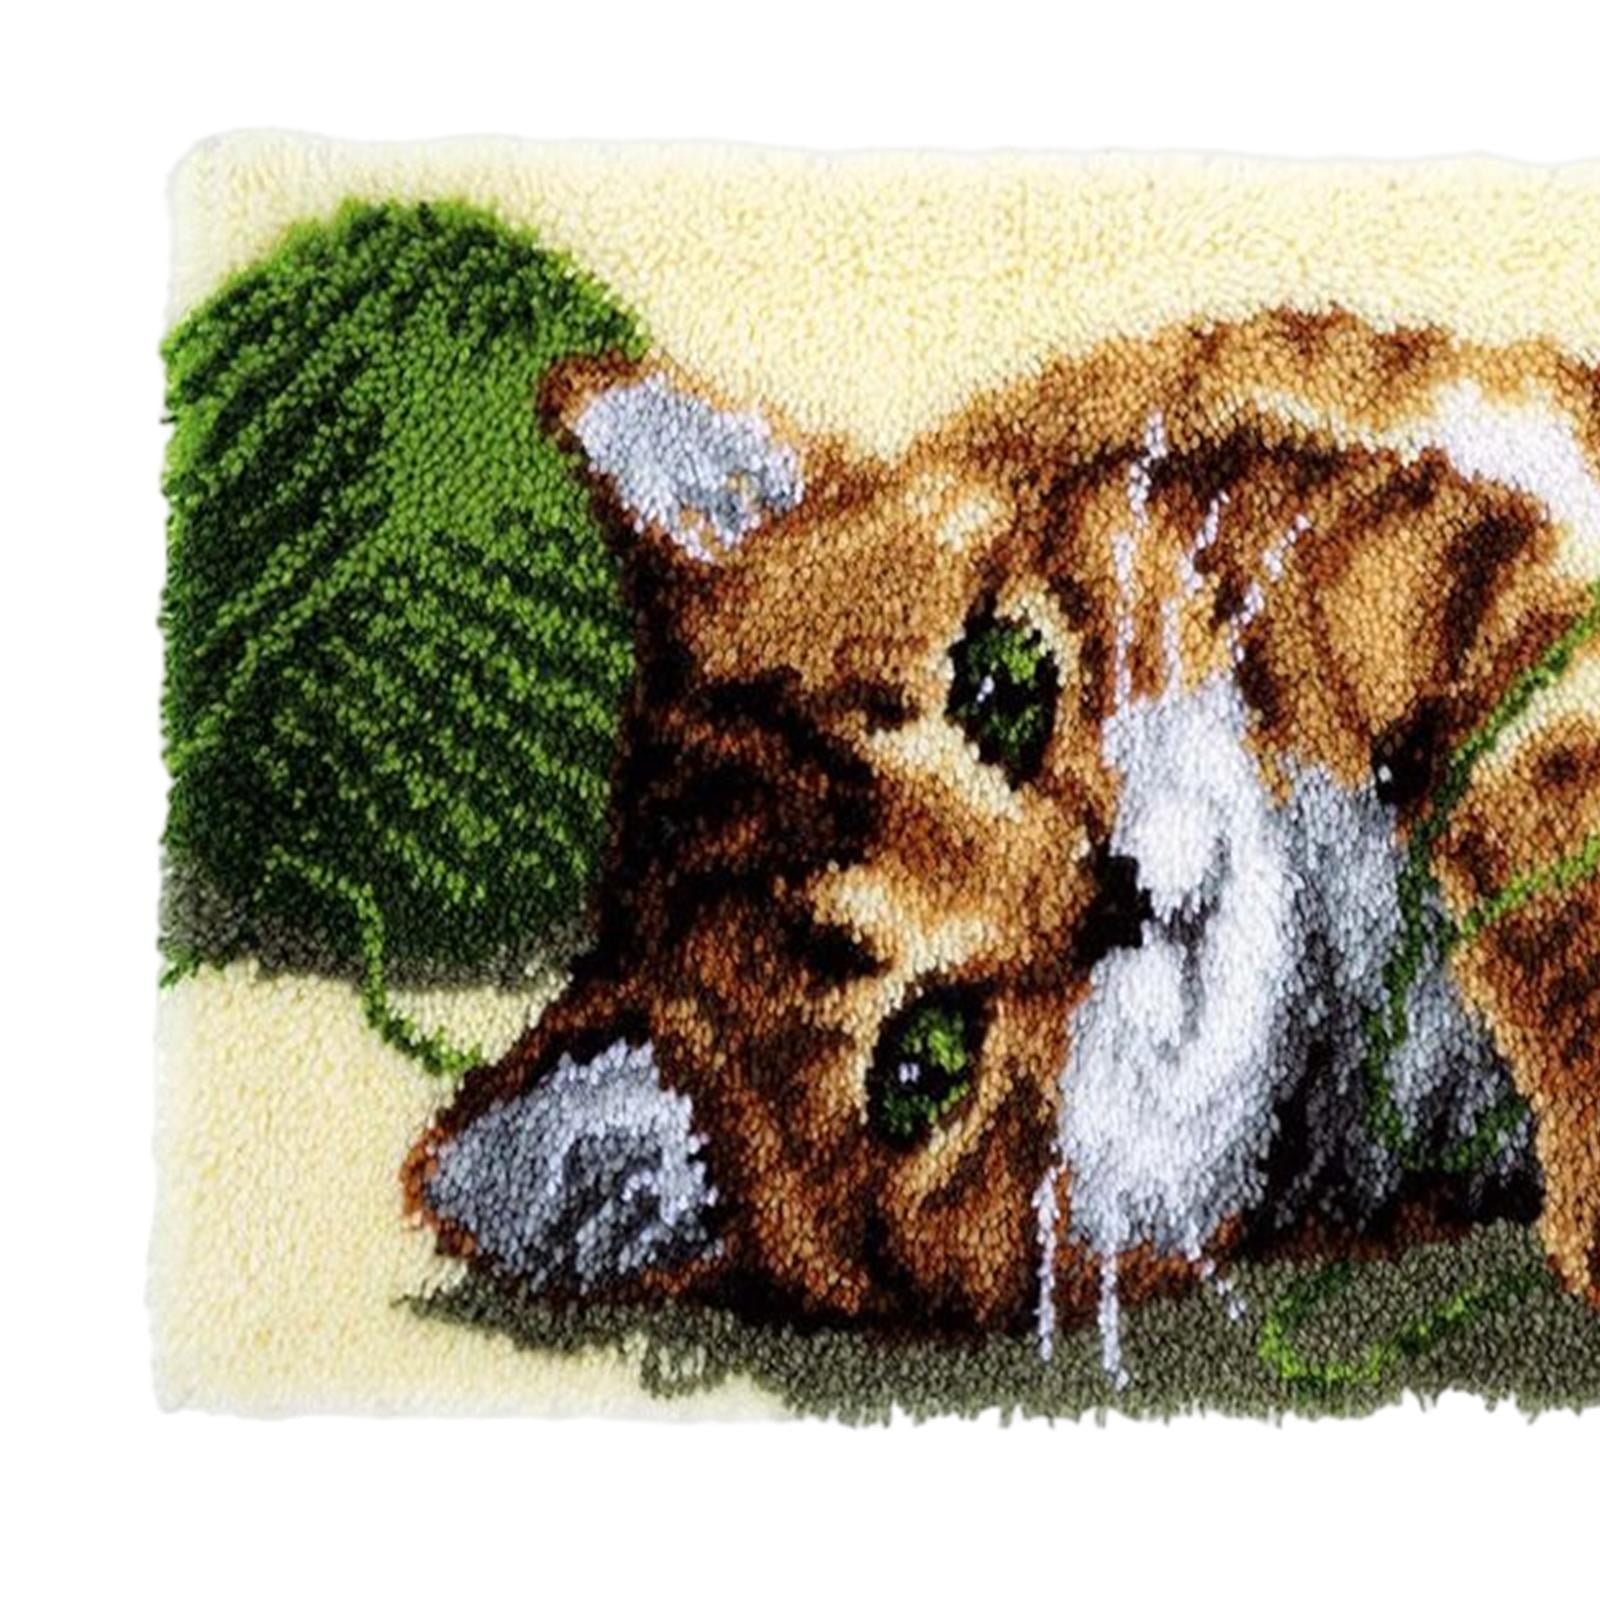 Abbraccia Latch Hook Rug Kits, DIY Cats Rug Making Kits for Adults Kids,Cat Pattern Needlework Embroidery Kits for Beginners Home Decor,60x40cm, Size